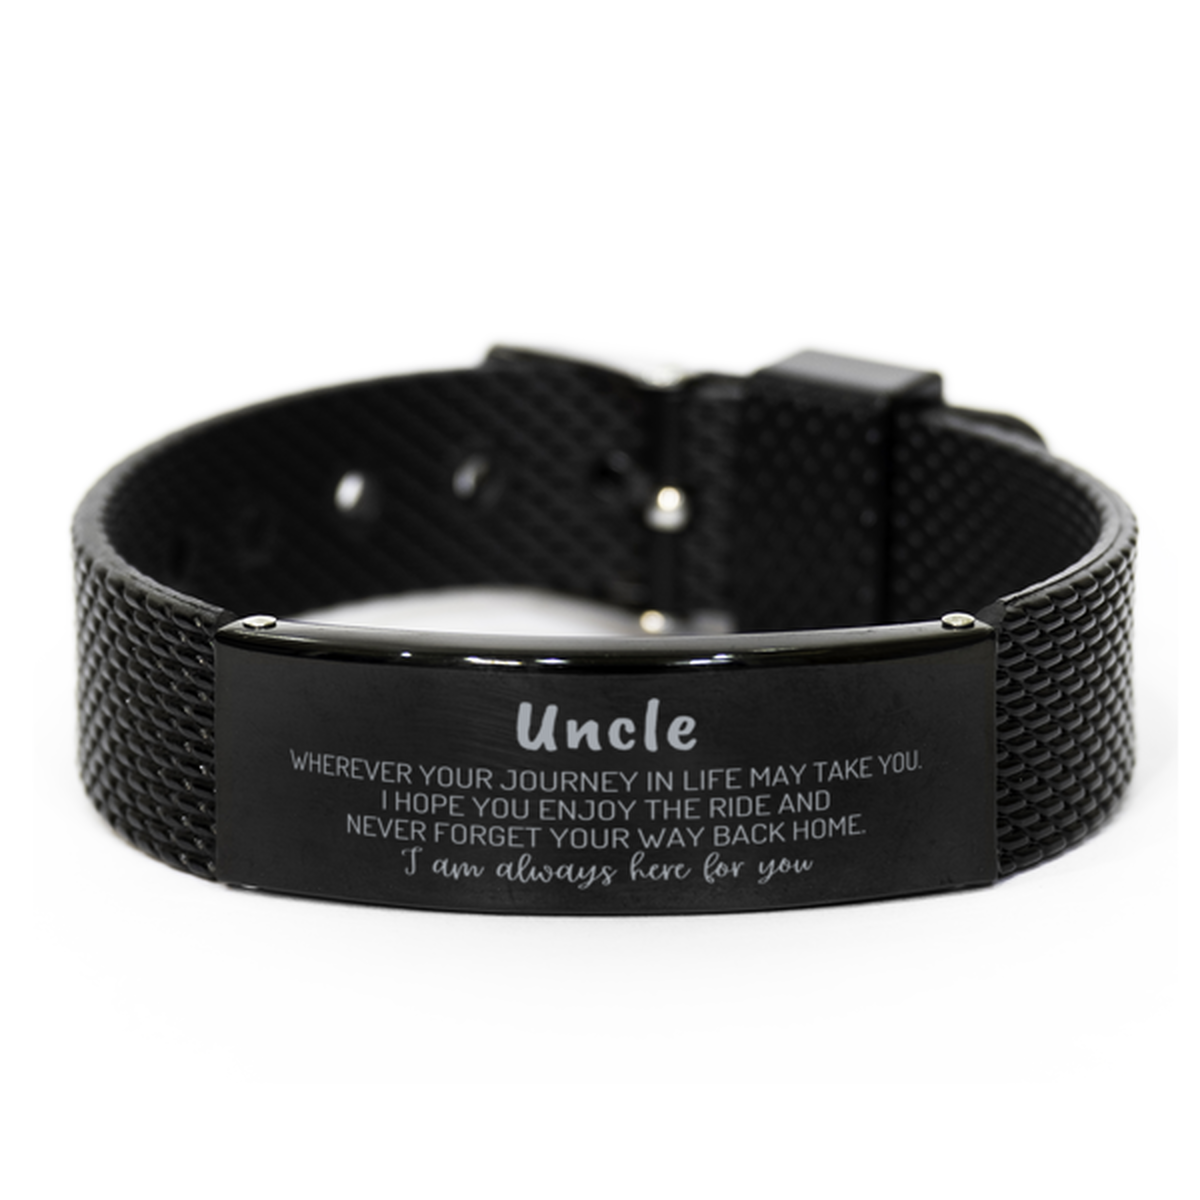 Uncle wherever your journey in life may take you, I am always here for you Uncle Black Shark Mesh Bracelet, Awesome Christmas Gifts For Uncle, Uncle Birthday Gifts for Men Women Family Loved One